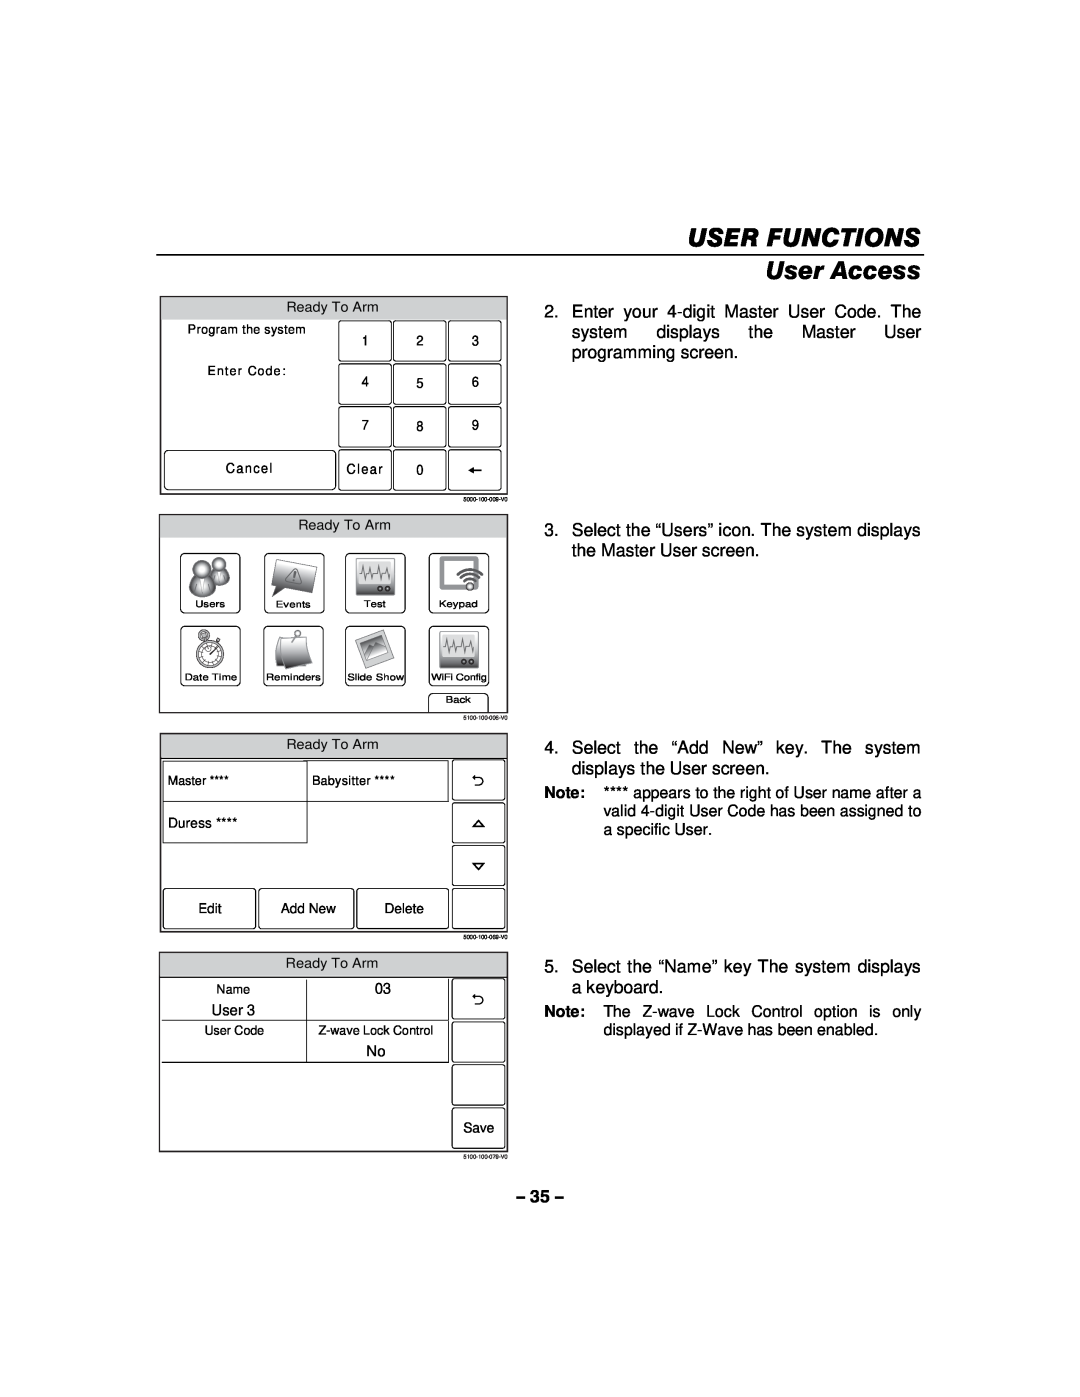 Honeywell L5100 manual User Functions, User Access 